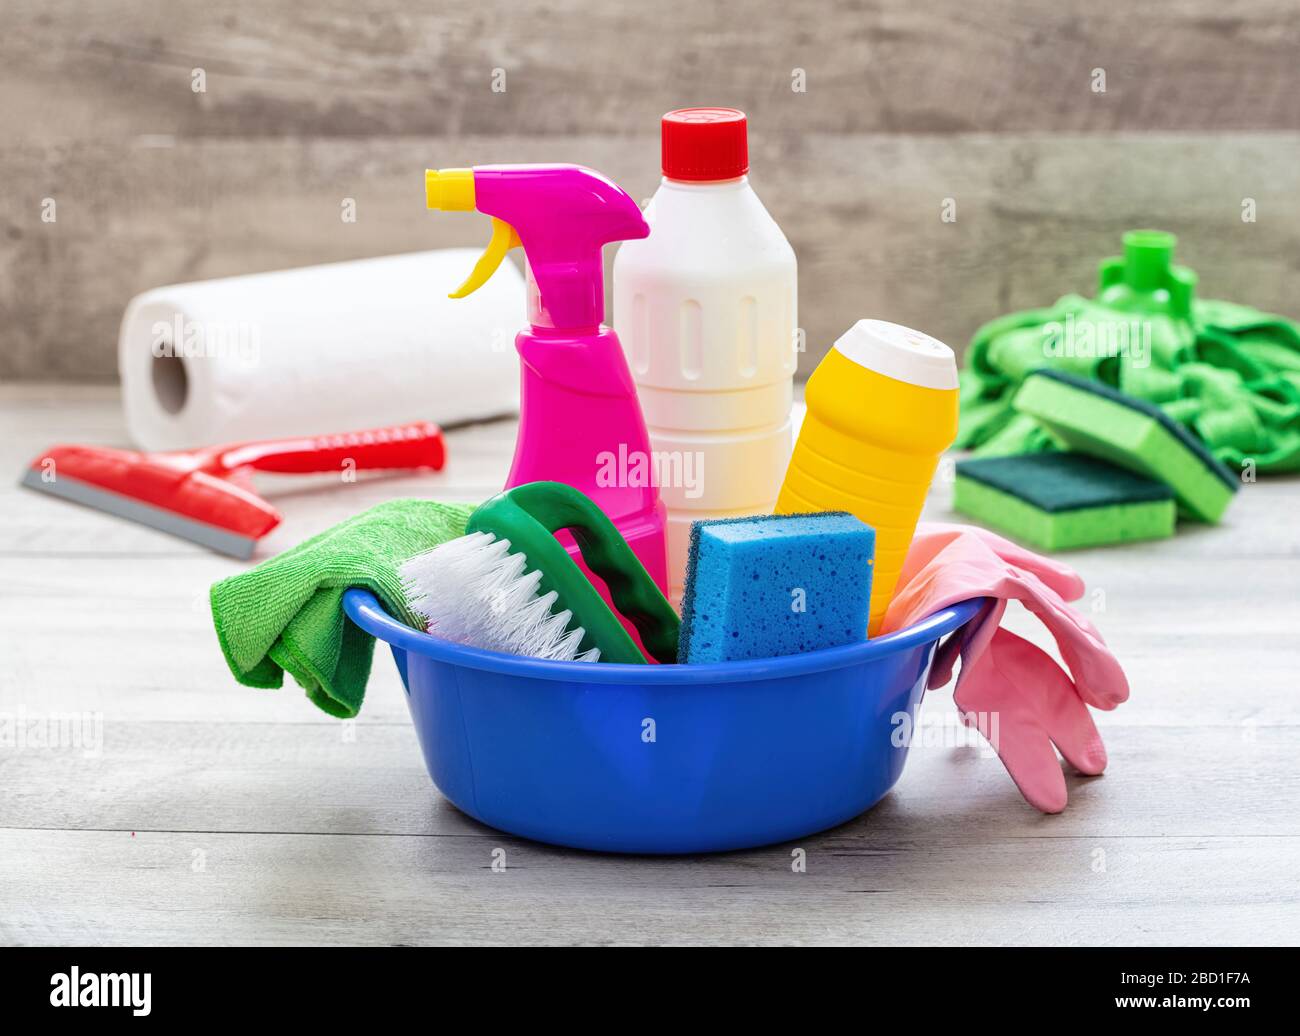 Cleaning products on the floor, home interior background. Chemical detergent bottles in a blue bowl. Domestic household or business sanitary cleaning Stock Photo